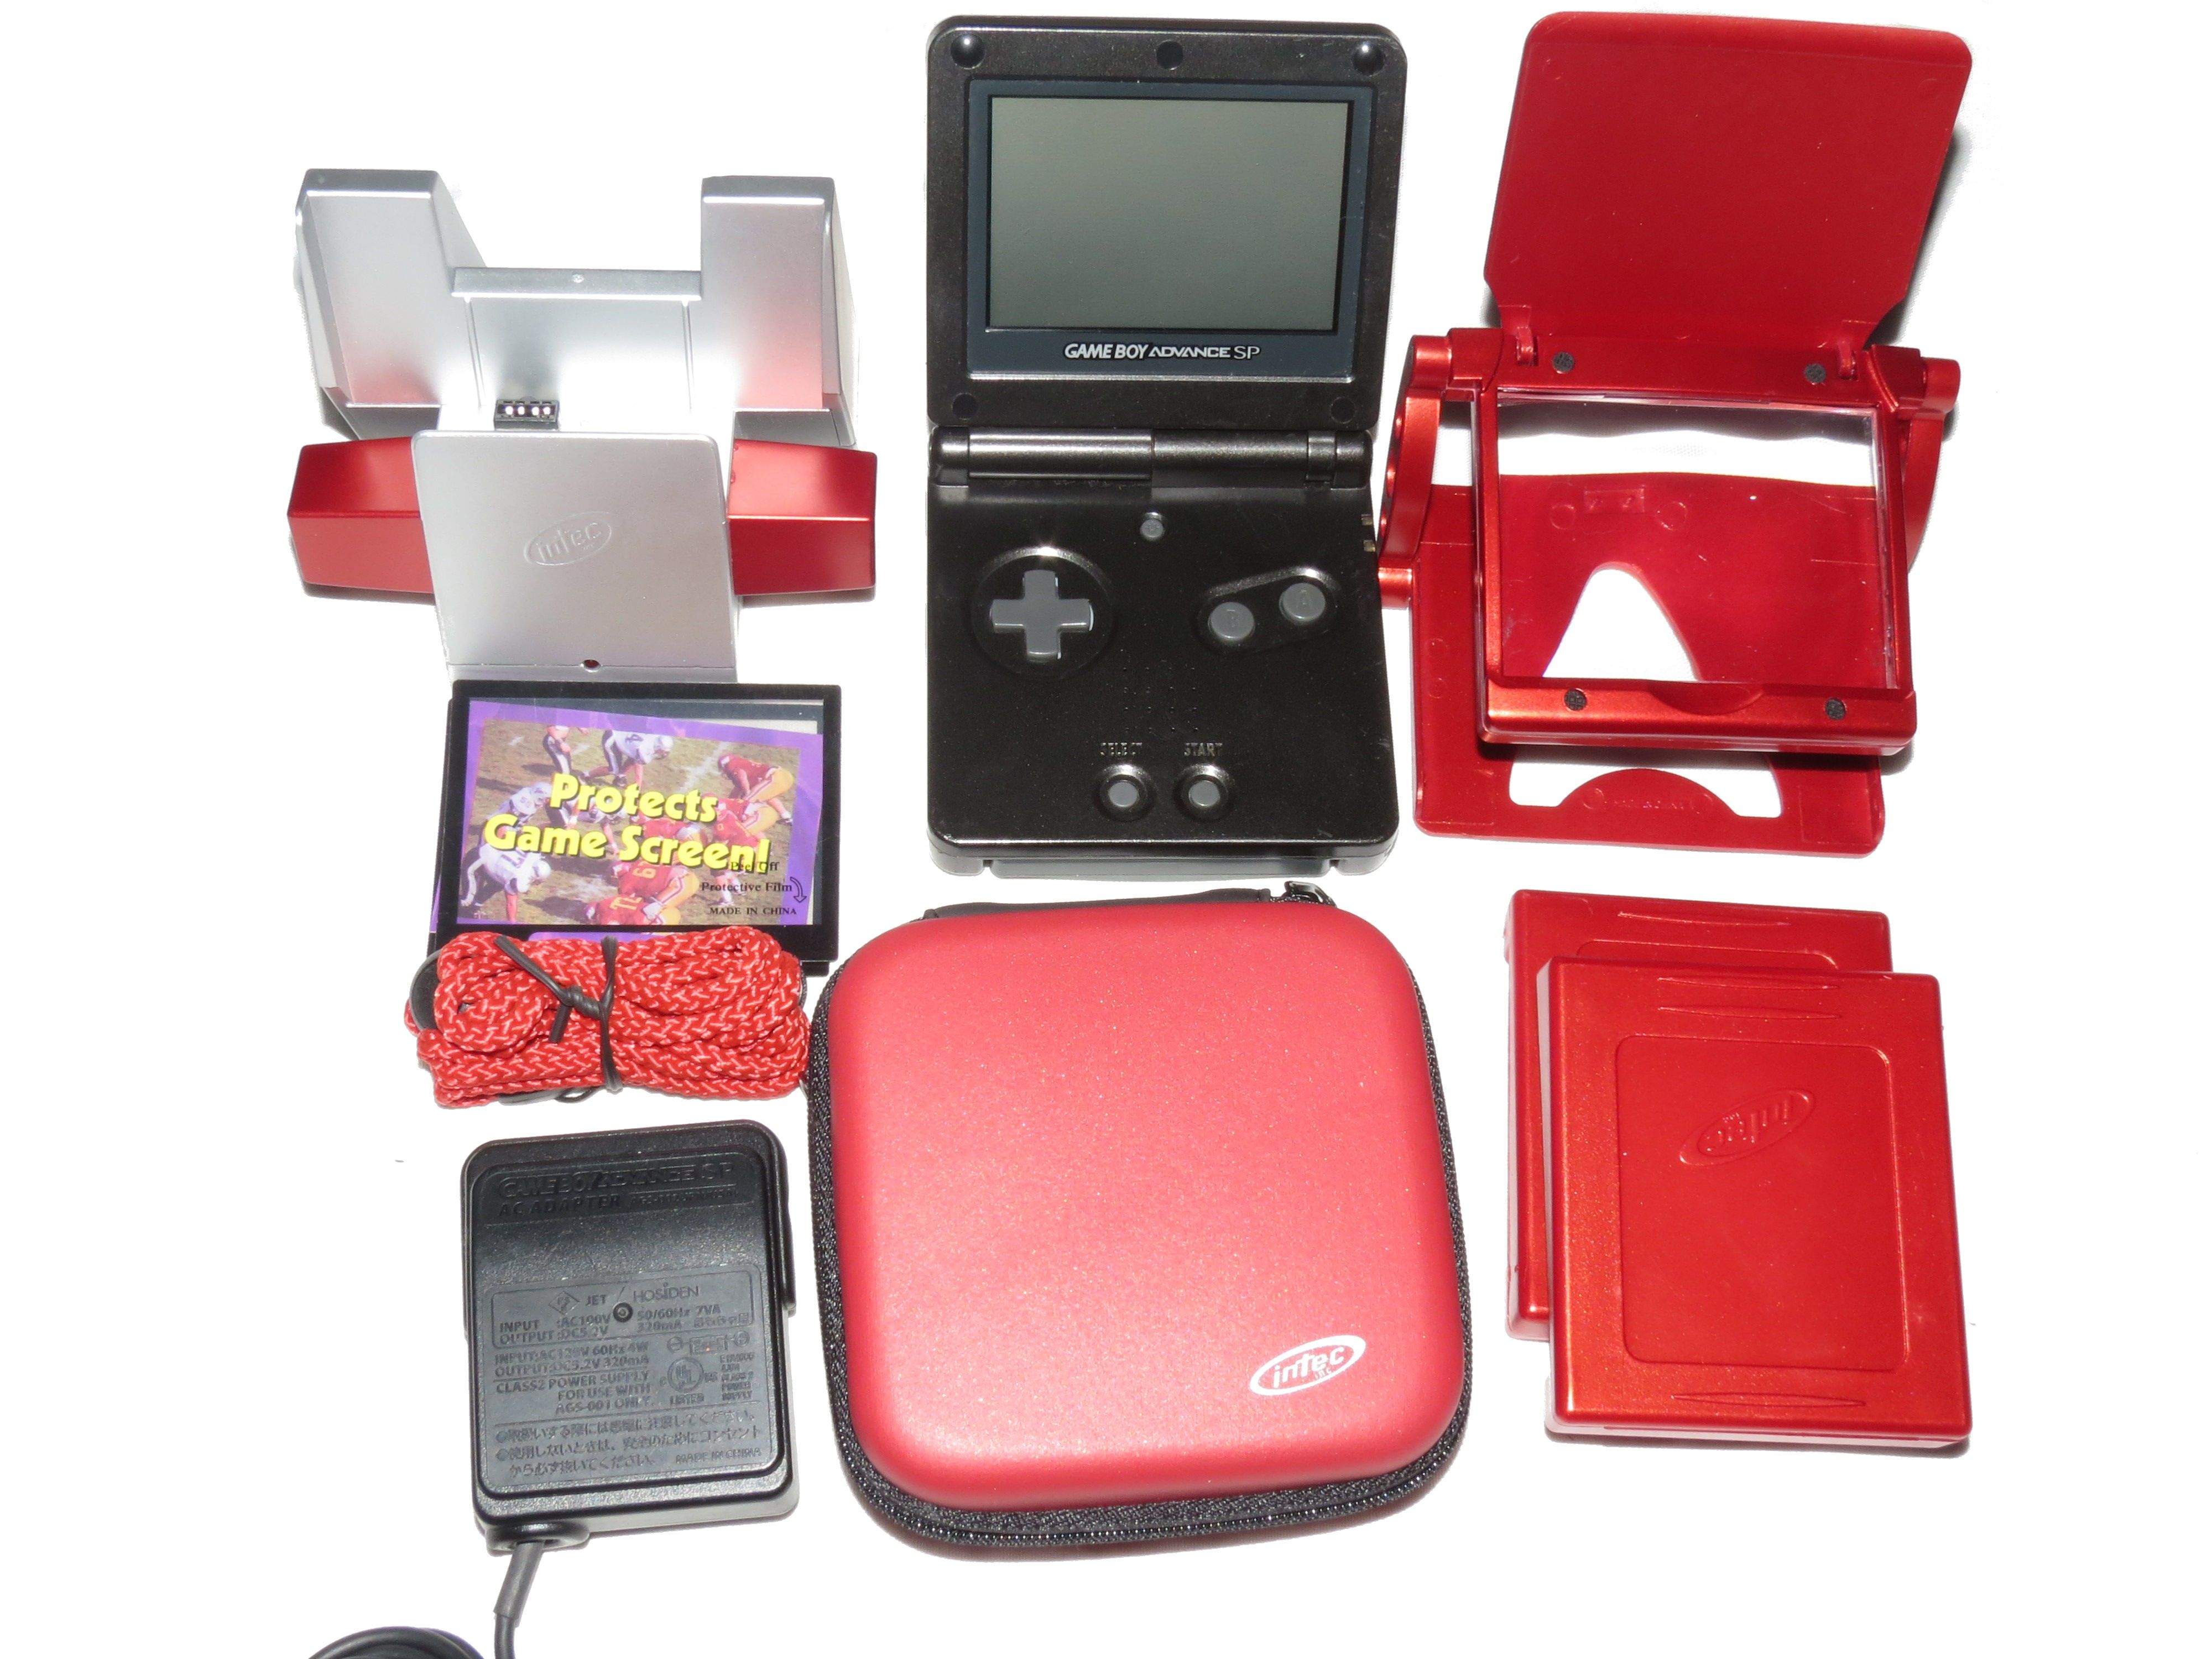  Game Boy Advance SP Onyx Black Handheld System and accessories